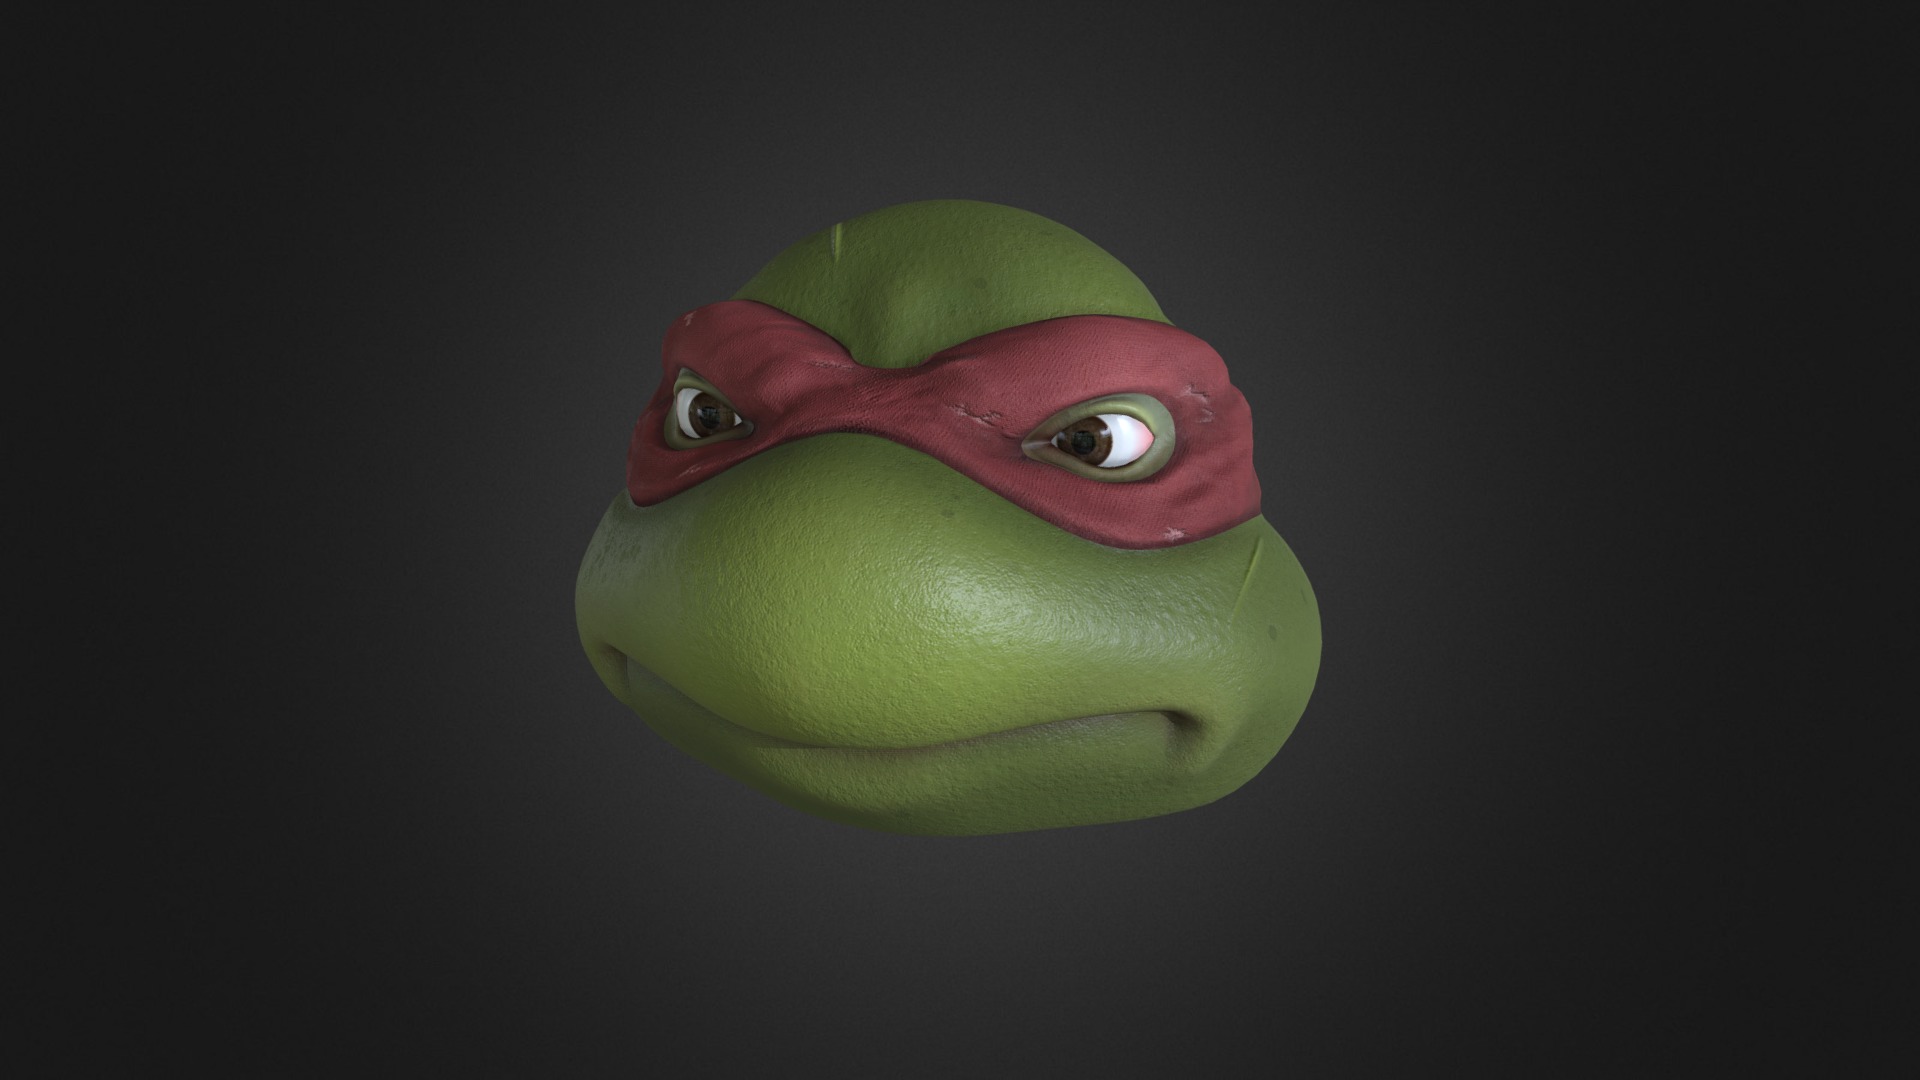 3D model TMNT Raph - This is a 3D model of the TMNT Raph. The 3D model is about a green frog with a red nose.